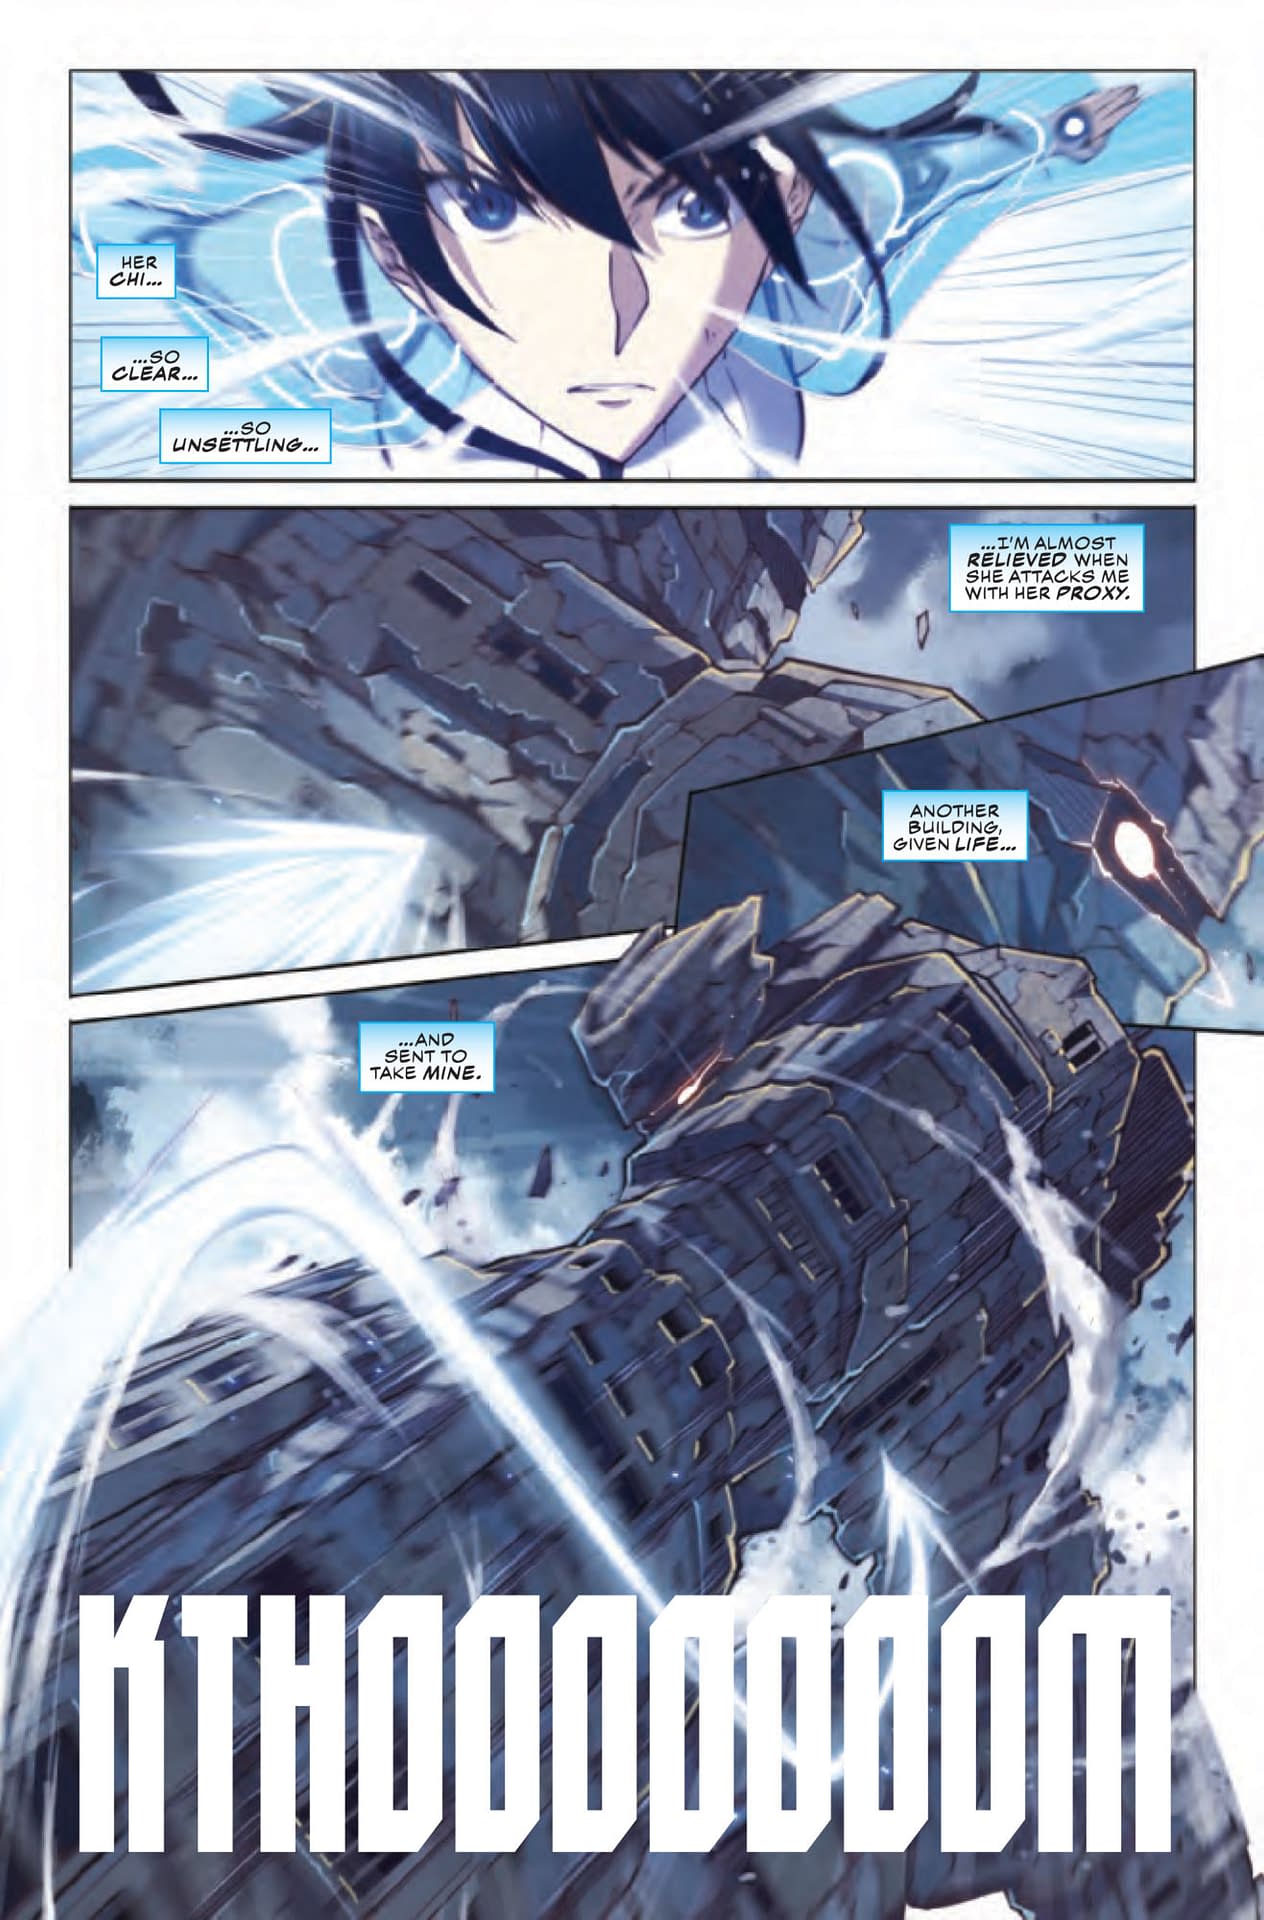 What Happens When You Try to Fire Wave? Aero #2 [Preview]